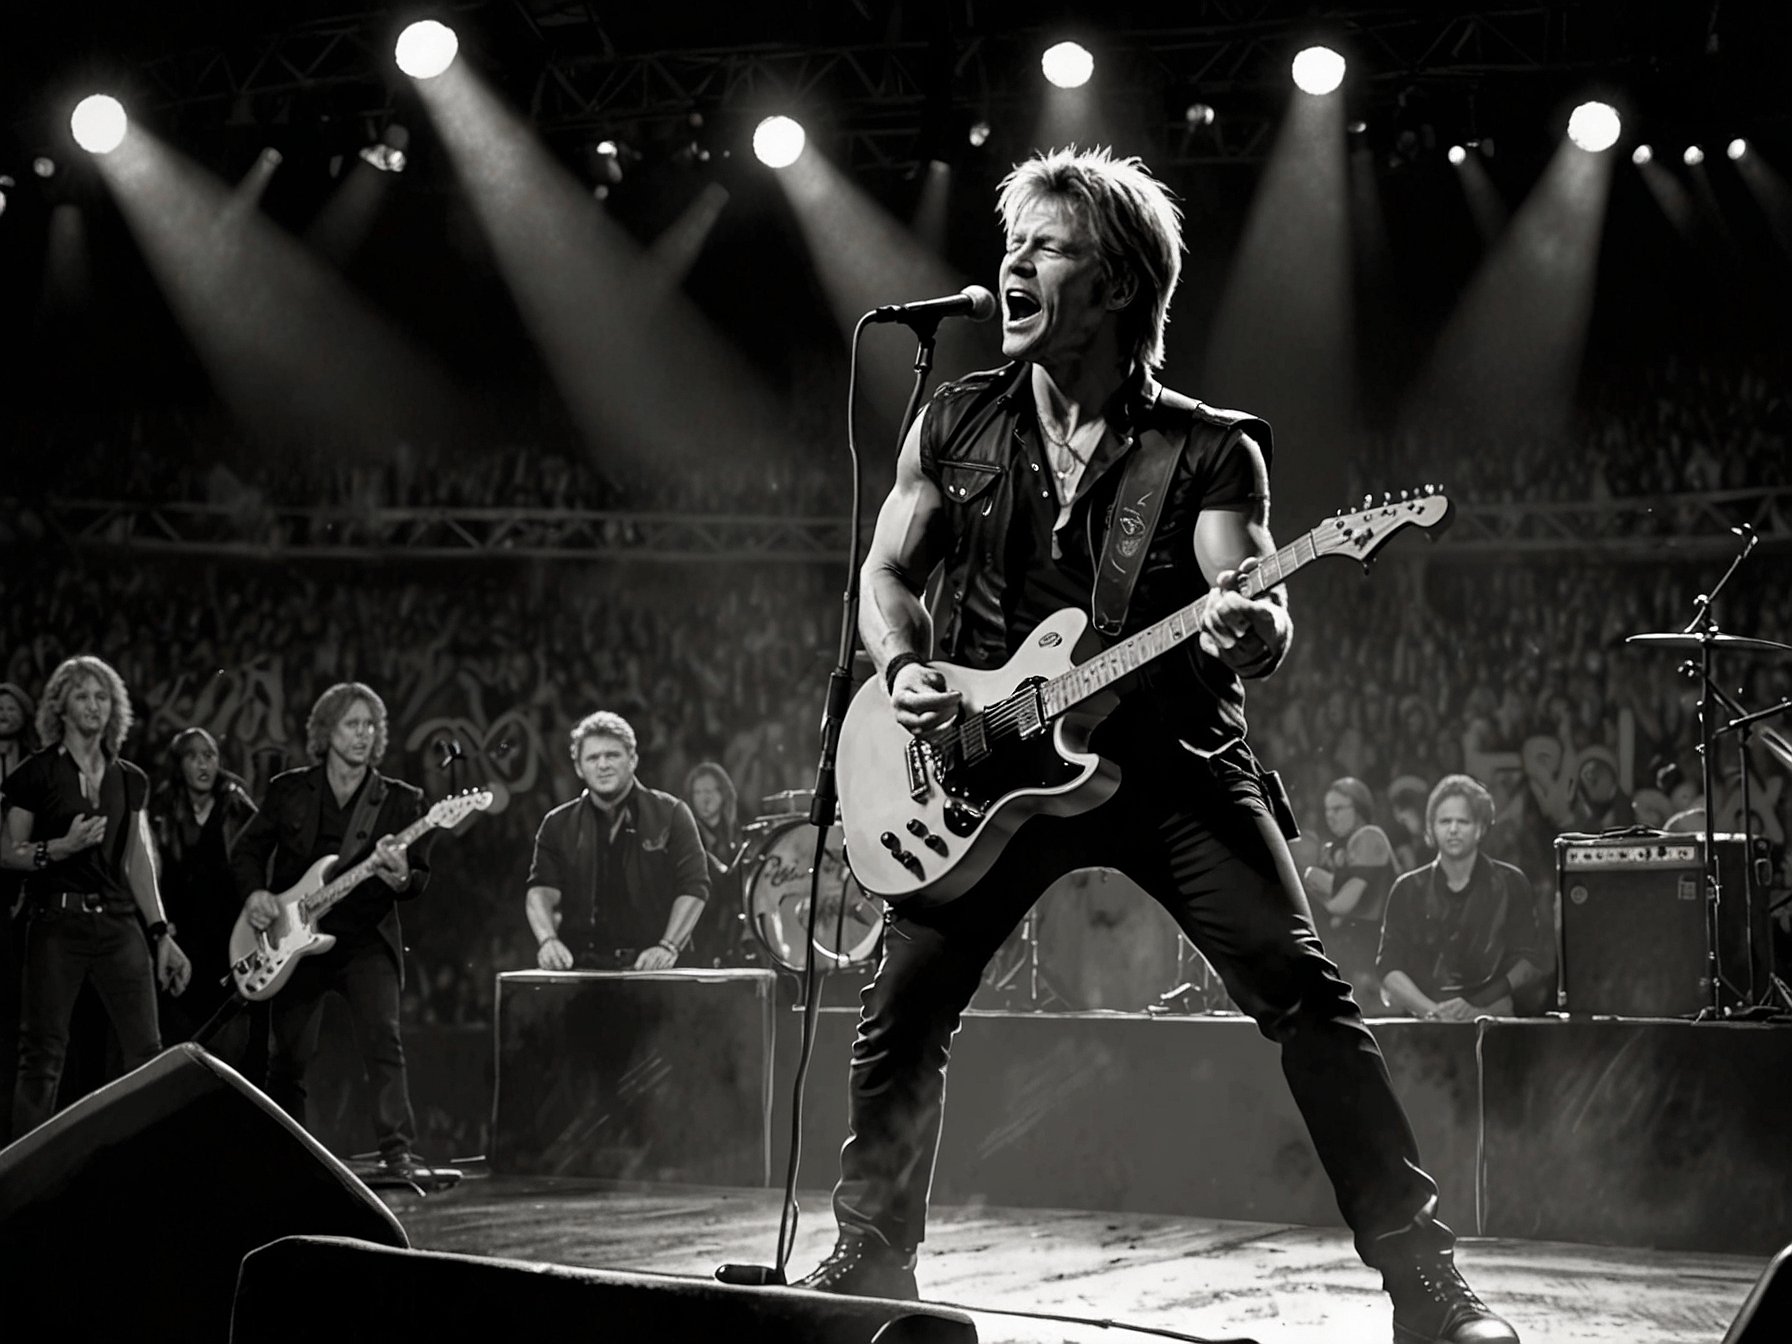 An image of Bon Jovi performing live on stage, capturing the band's energy and emotional connection with the audience, reflecting the themes of their latest album, 'Forever'.